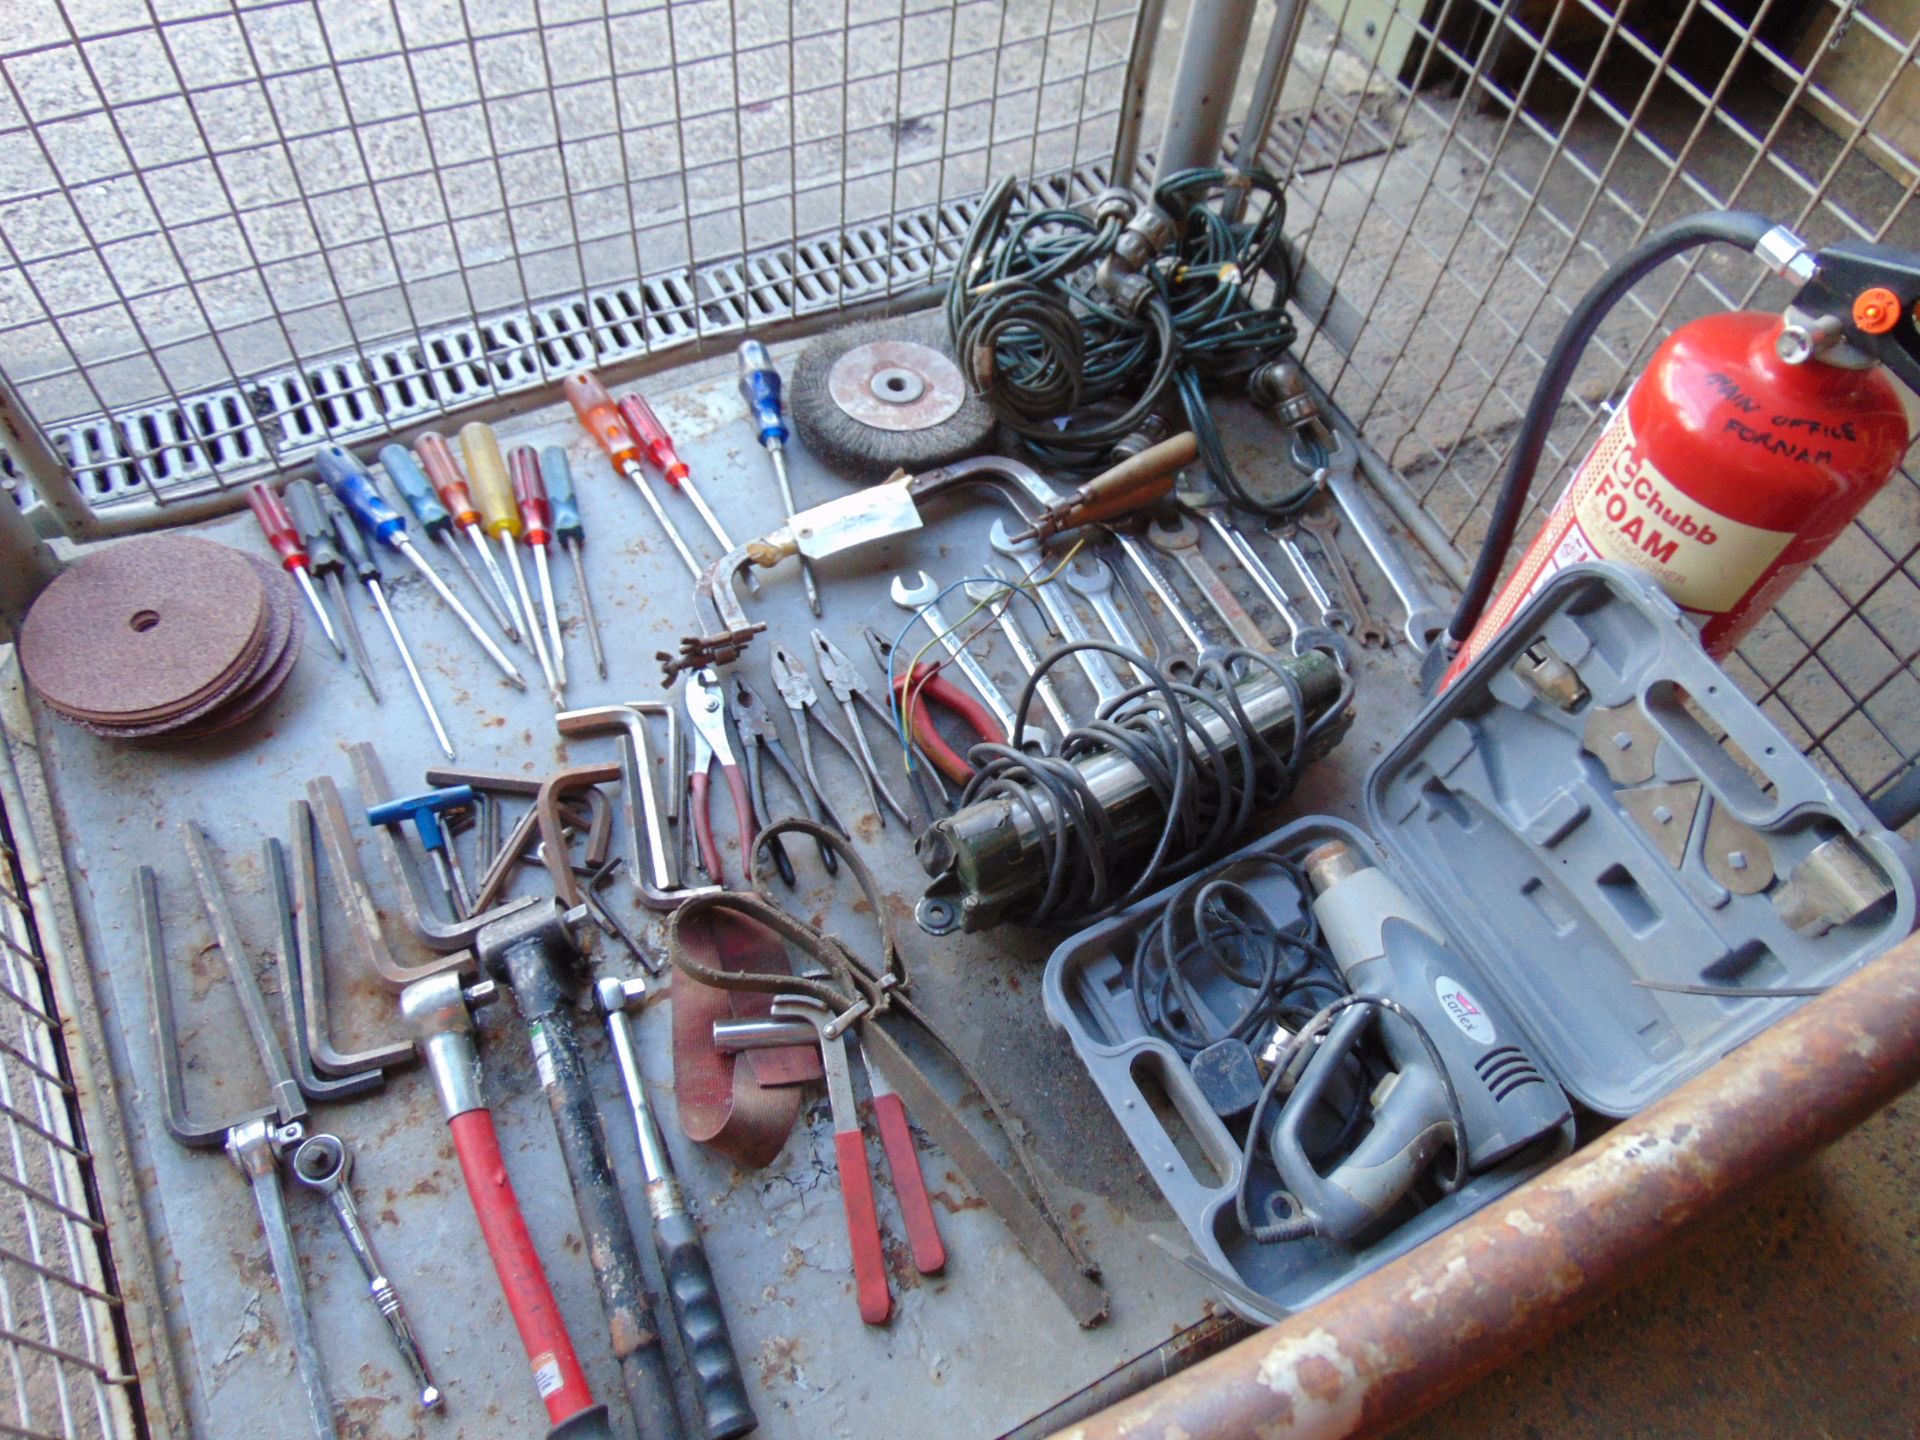 1 x Stillage of Workshop Tools, Spanners, Lights, Torque Wrenches etc - Image 5 of 8